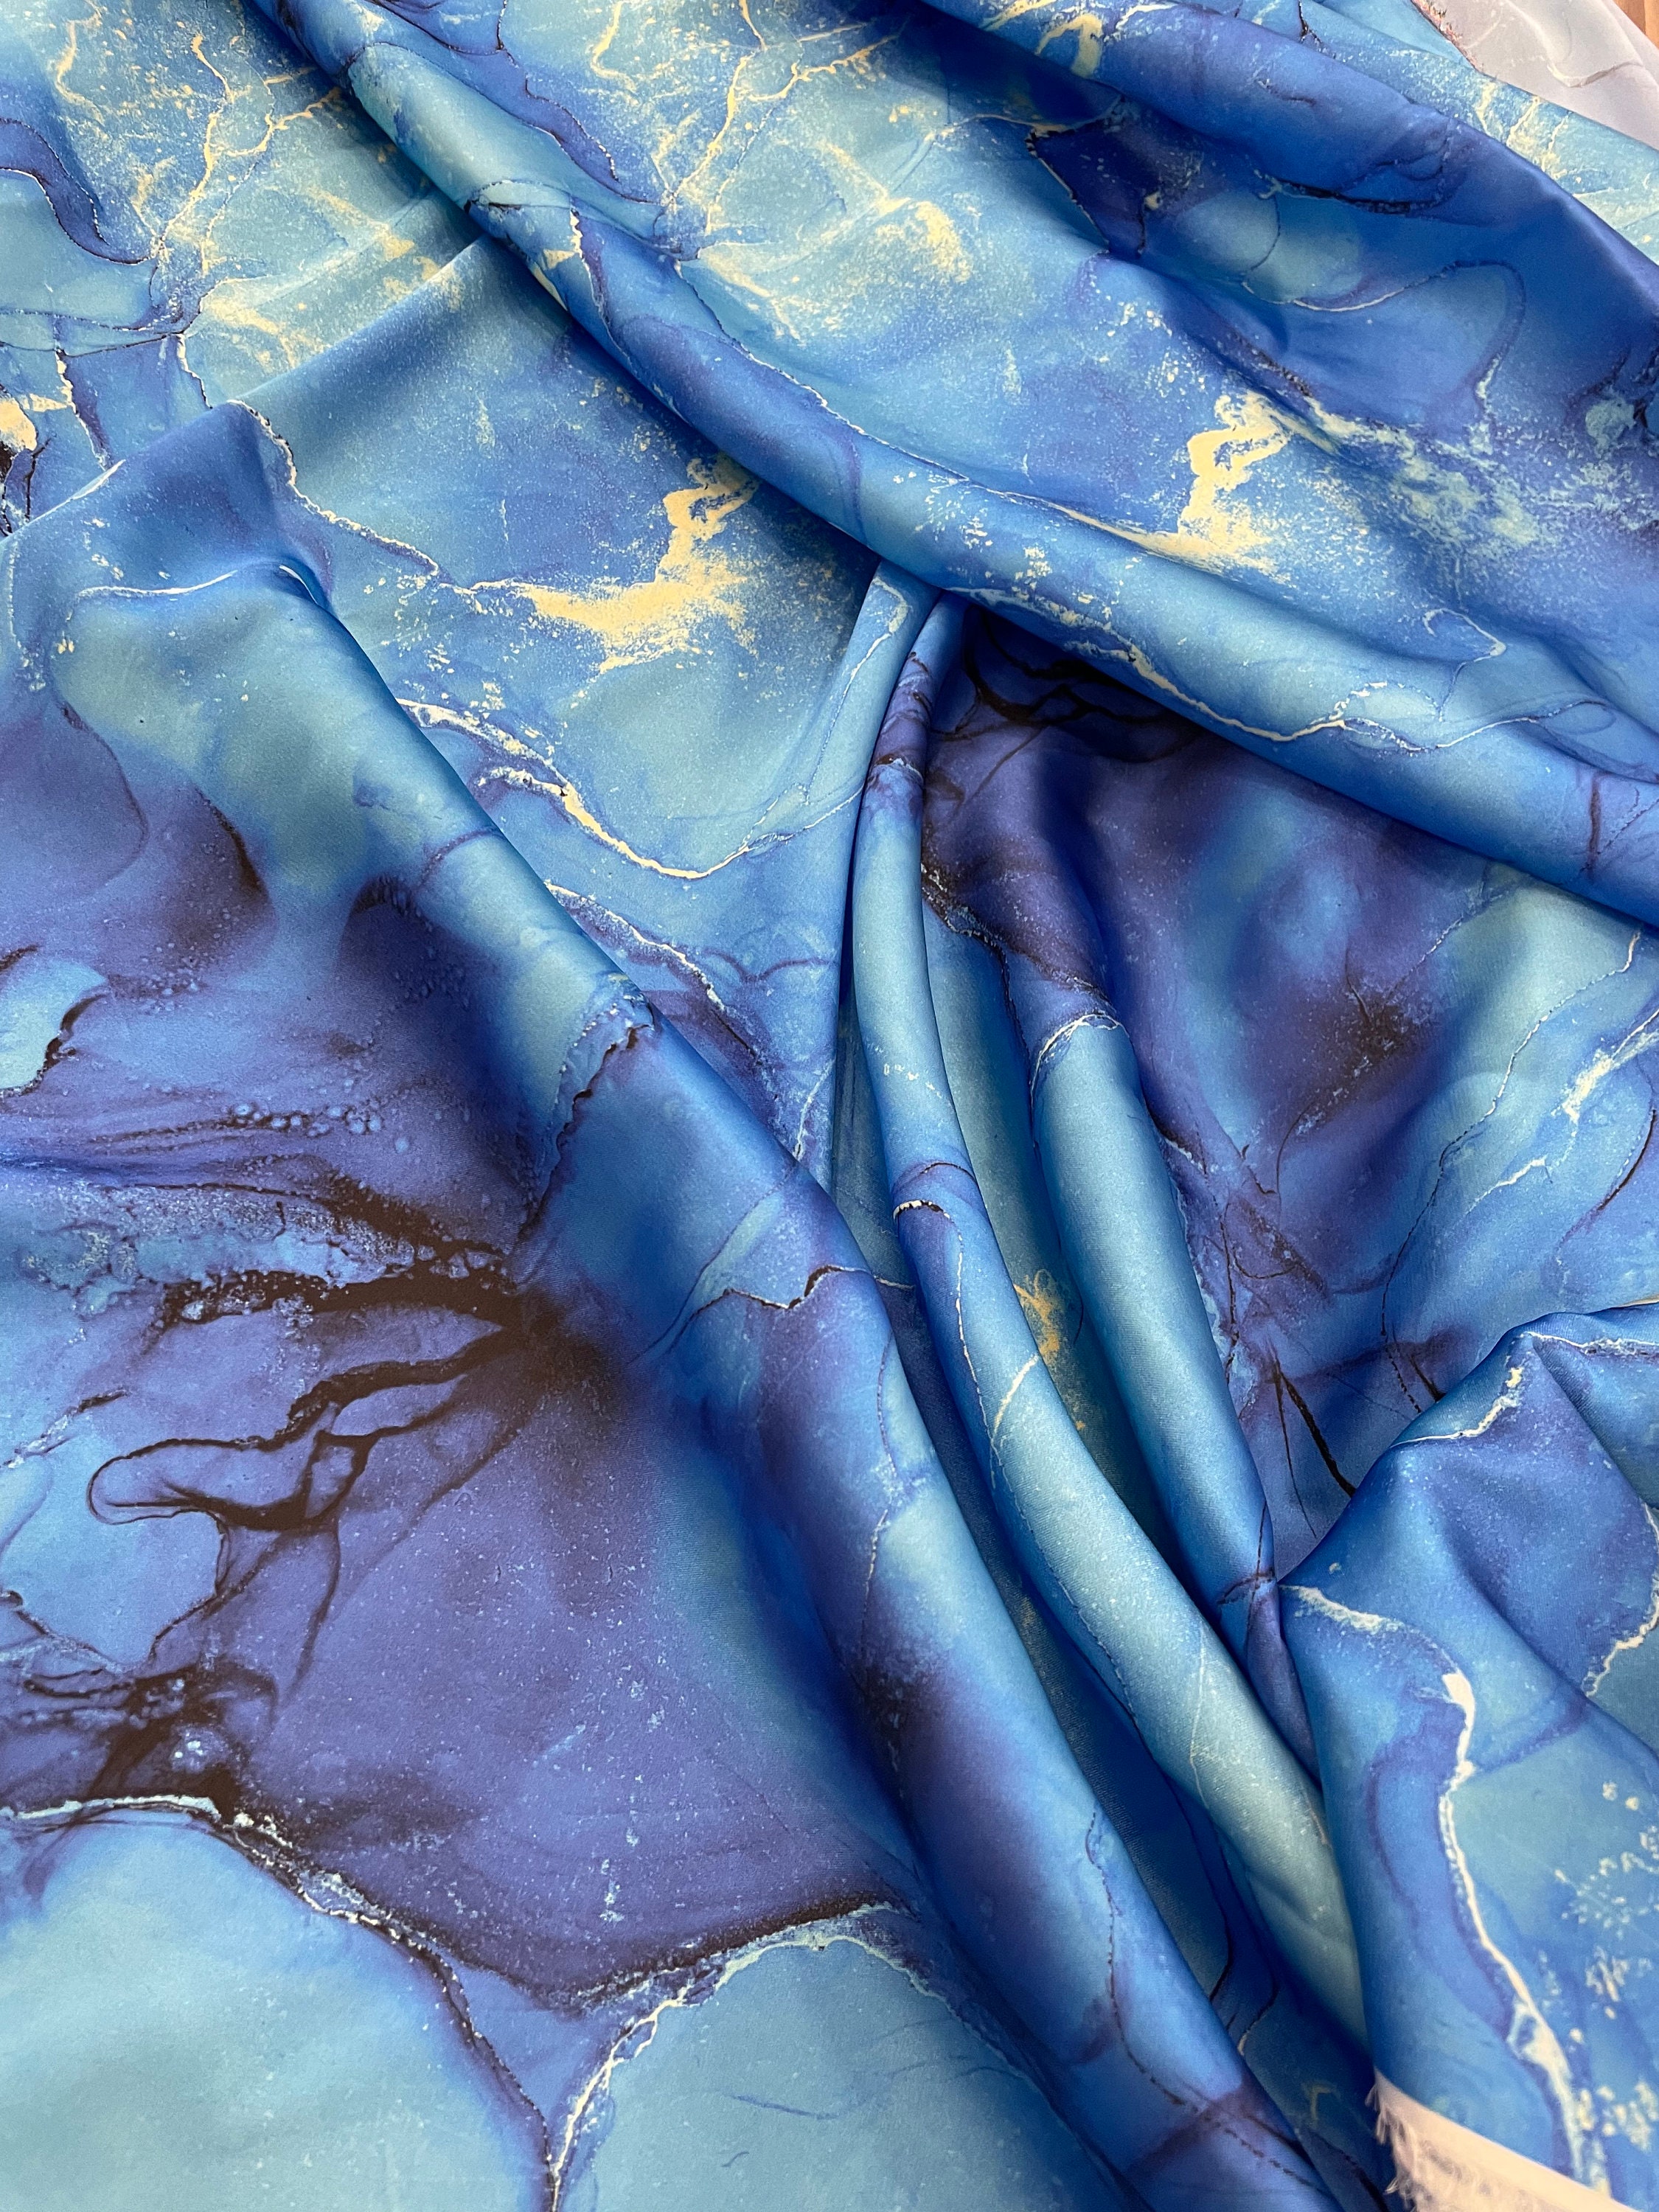 oneOone Silk Tabby Dusty Blue Fabric Tie Dye Dress Material Fabric Print  Fabric By The Yard 42 Inch Wide 